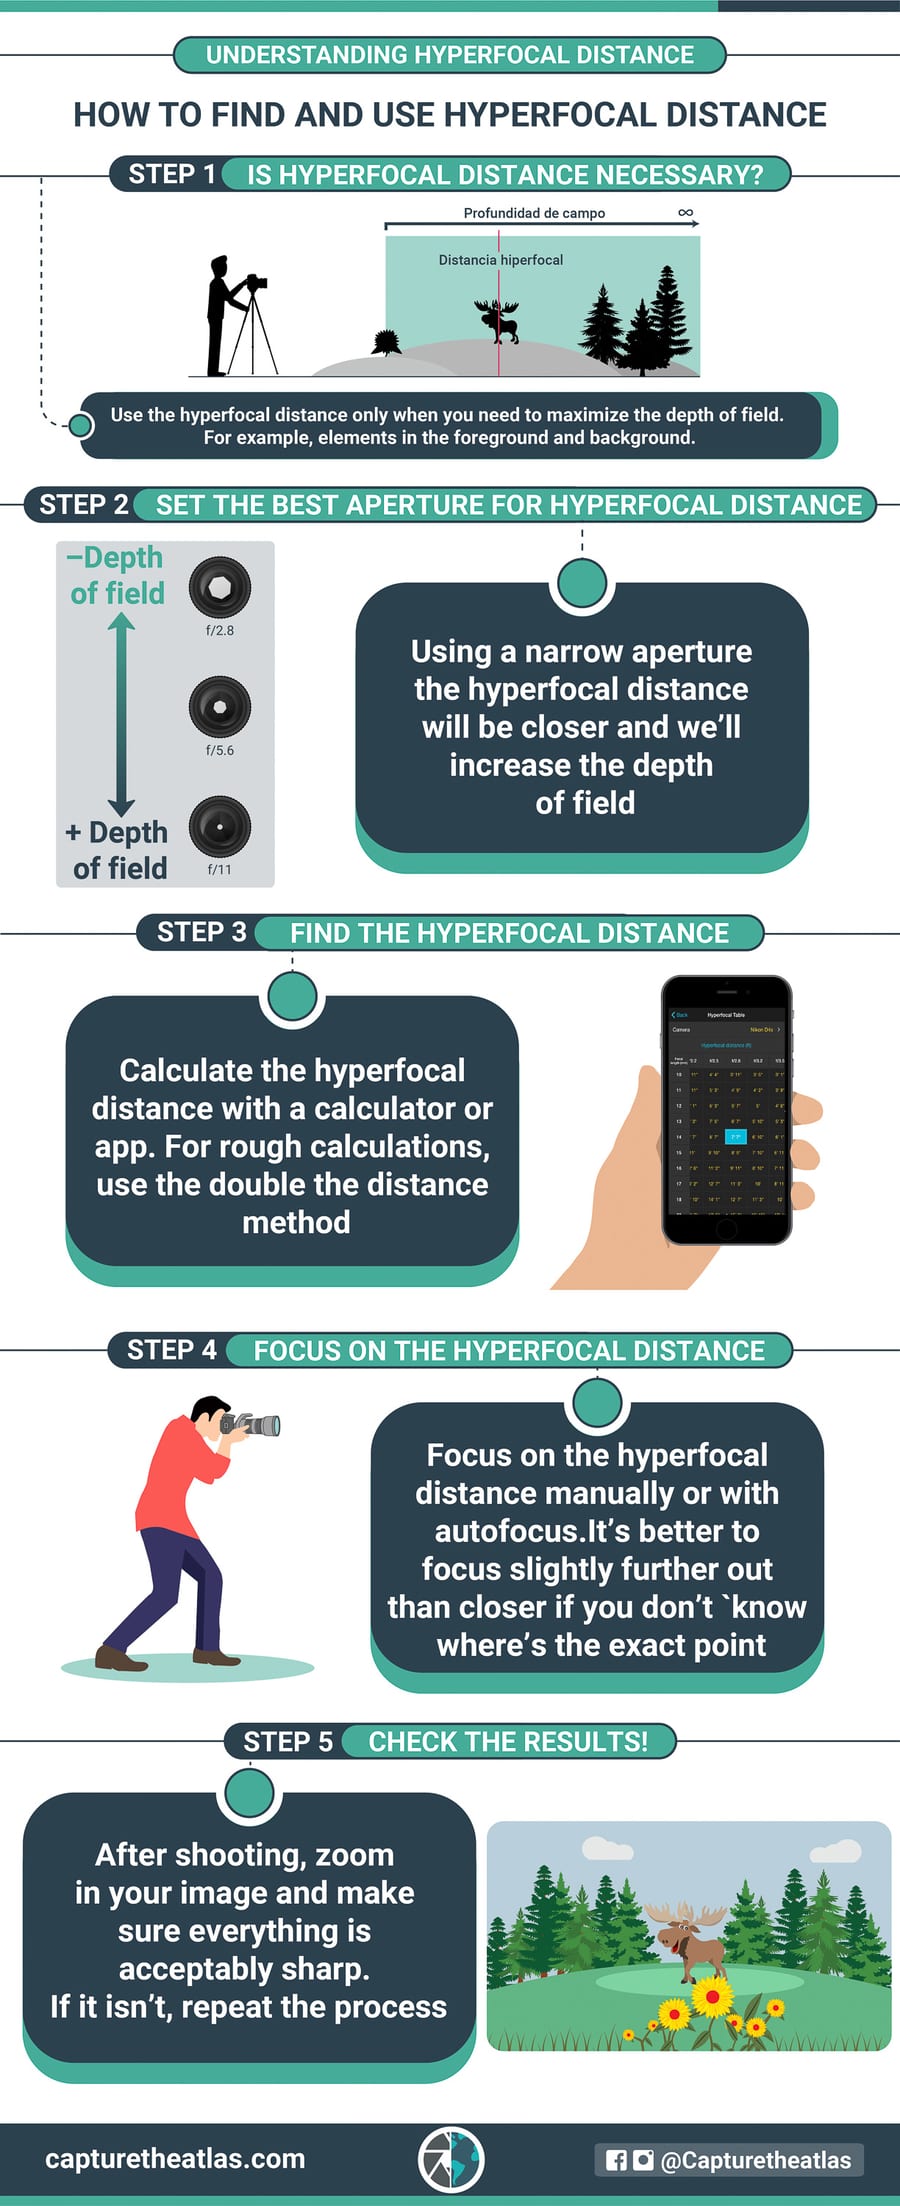 hyperfocal distance infographic